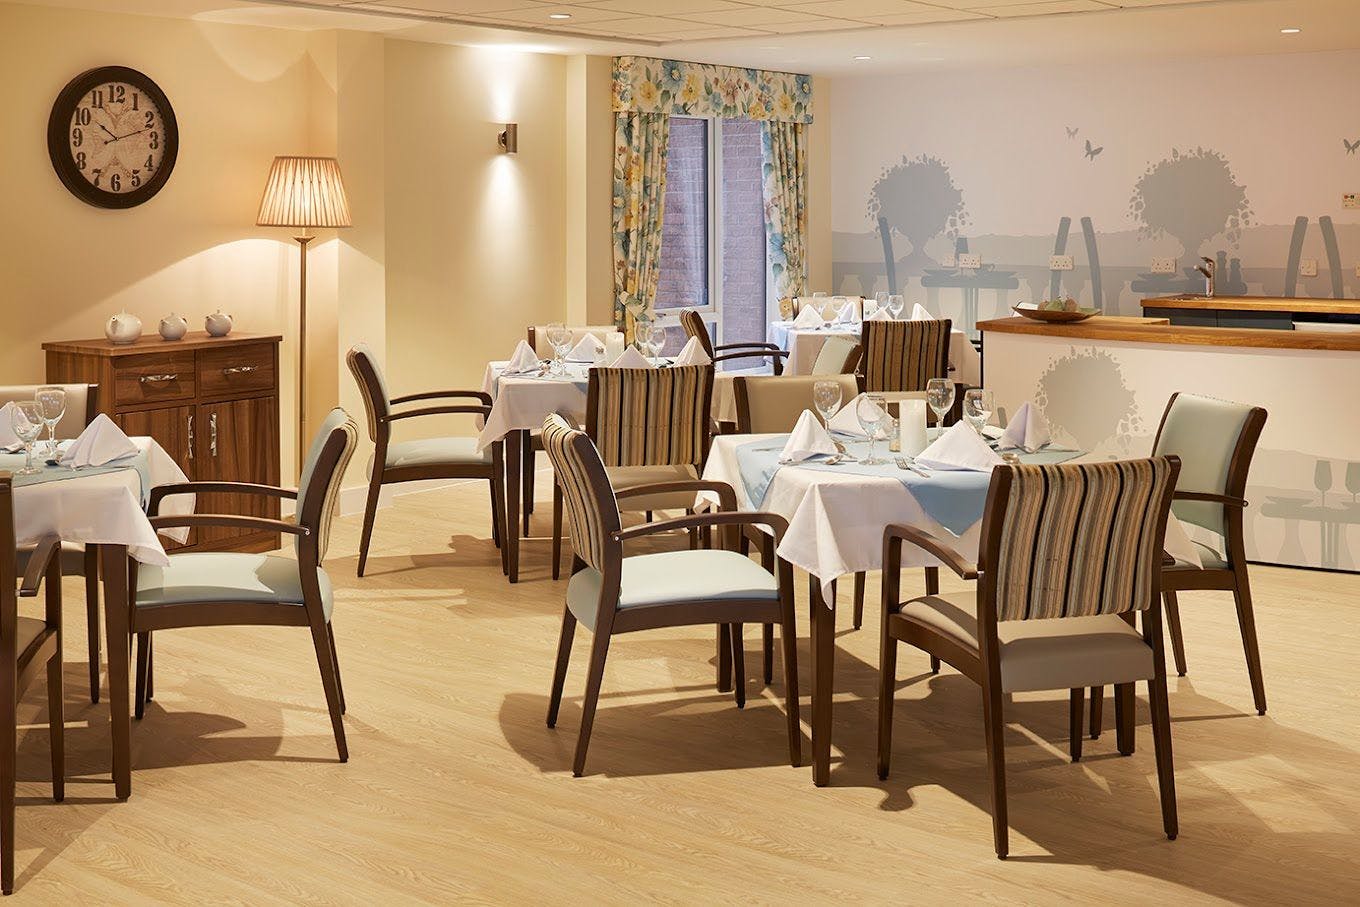 Dining room of Seacroft Green care home in Leeds, Yorkshire